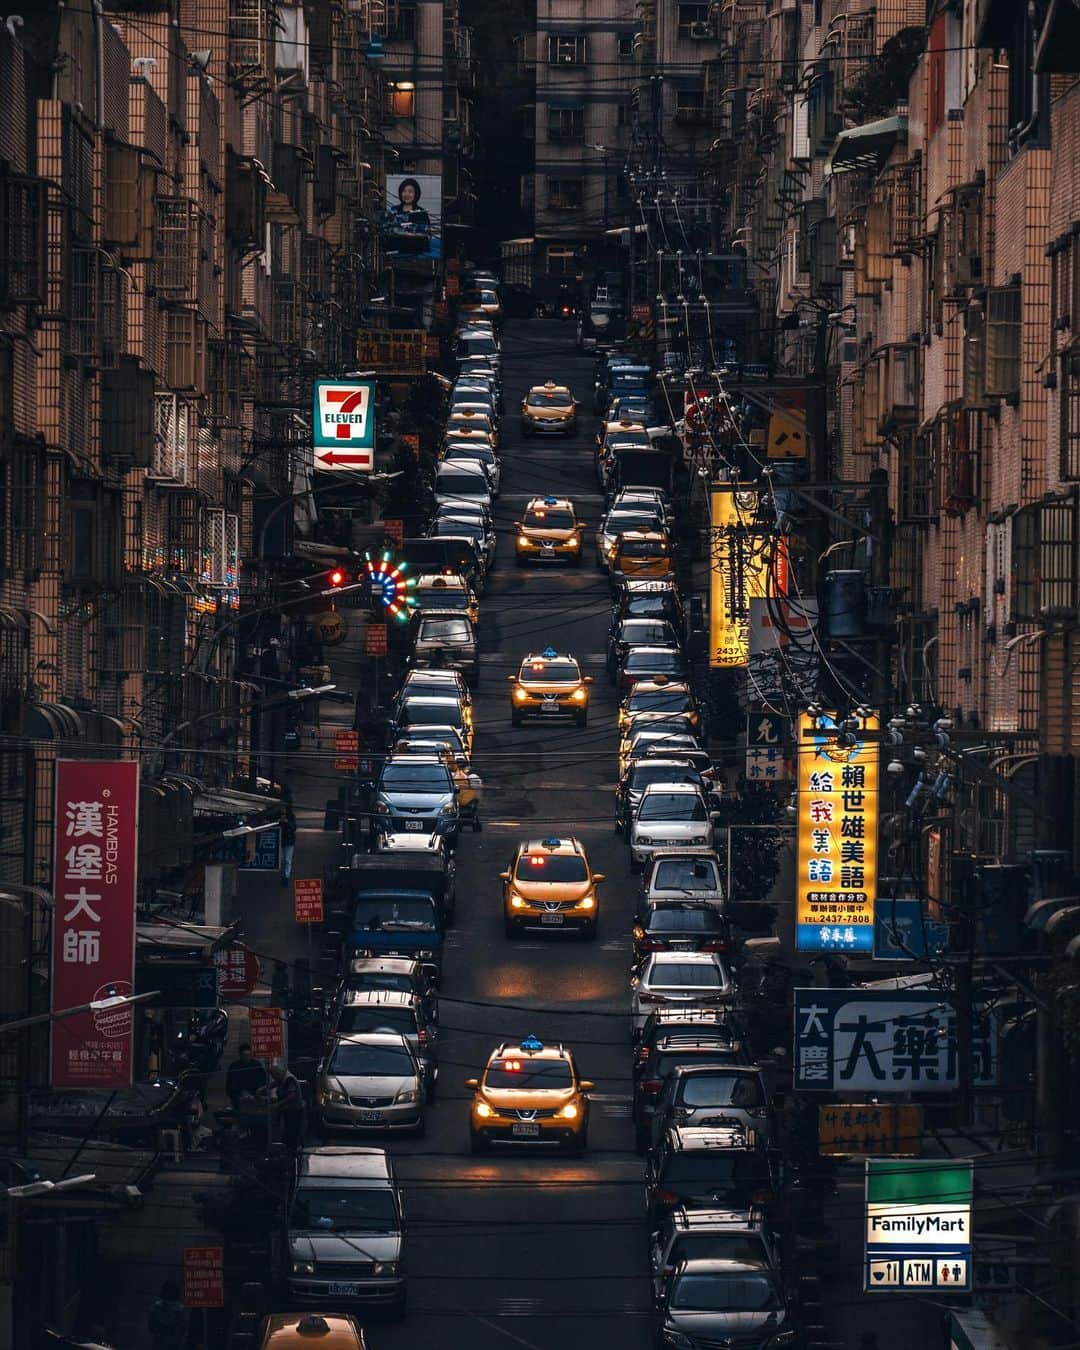 R̸K̸のインスタグラム：「The street straight down the abrupt descent of the hill, the taxi line up one after another. It's a familiar sight of this cozy small city. #hellofrom Keelung Taiwan ・ ・ ・ ・  #earthpix #thegreatplanet #discoverearth #fantastic_earth #awesome_earthpix #lifeofadventure #livingonearth #theweekoninstagram  #theglobewanderer #visualambassadors #welivetoexplore #awesome_photographers #IamATraveler #wonderful_places #TLPics #depthobsessed #designboom #voyaged #sonyalpha #bealpha #aroundtheworldpix  #artofvisuals #streets_vision #cnntravel #complexphotos #d_signers #onlyforluxury  #bbctravel #lovetheworld @sonyalpha  @lightroom @9gag @500px @paradise @mega_mansions @natgeotravel @awesome.earth」